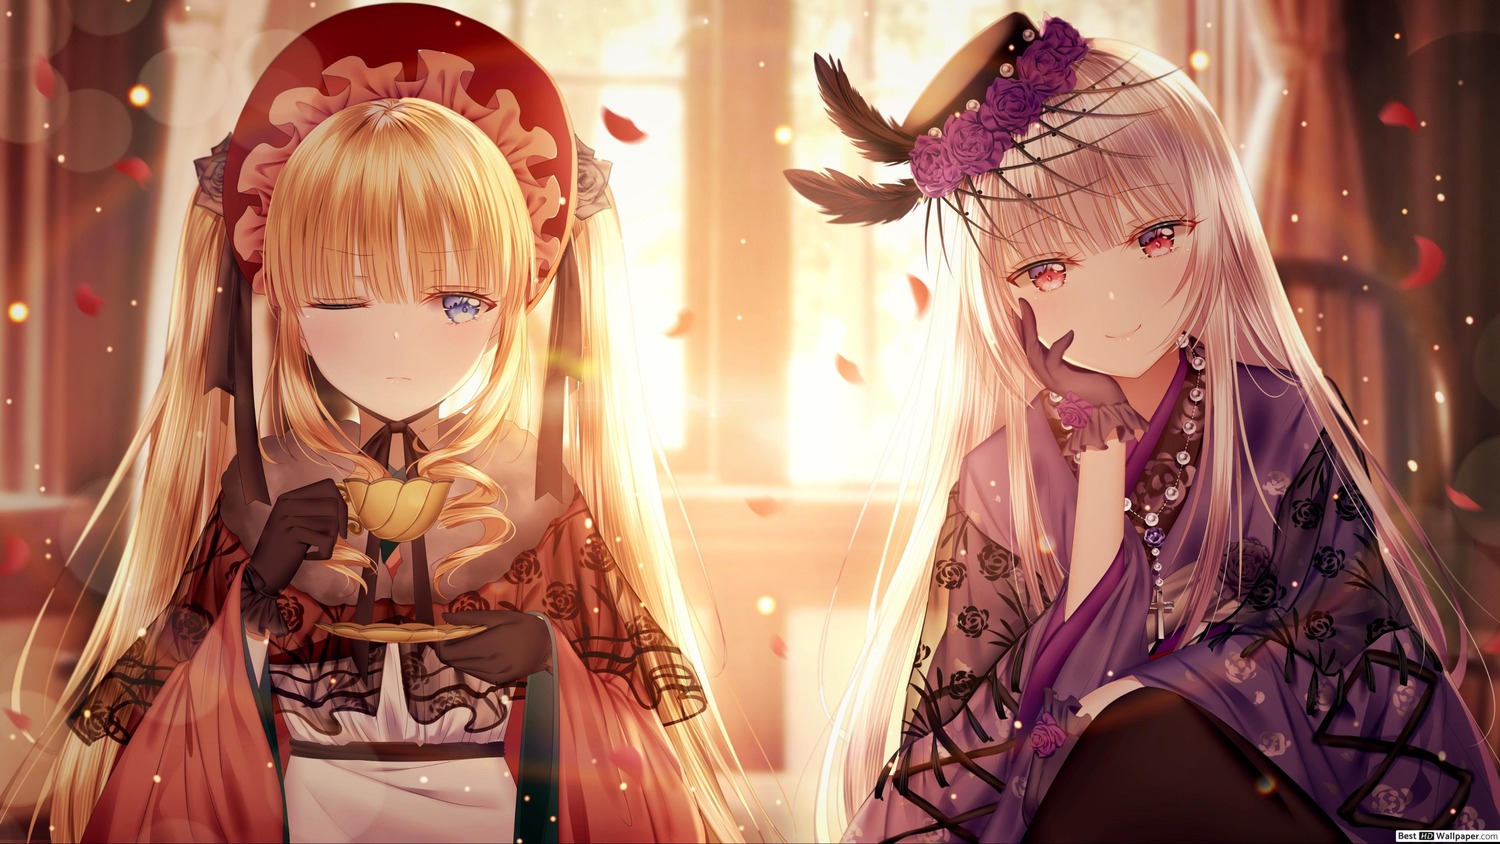 2girls bangs blonde_hair blue_eyes blurry_background blush closed_mouth curtains dress eyebrows_visible_through_hair feathers flower gloves hat imageshinku indoors long_hair looking_at_viewer multiple_girls one_eye_closed petals red_eyes see-through shinku smile suigintou twintails very_long_hair window